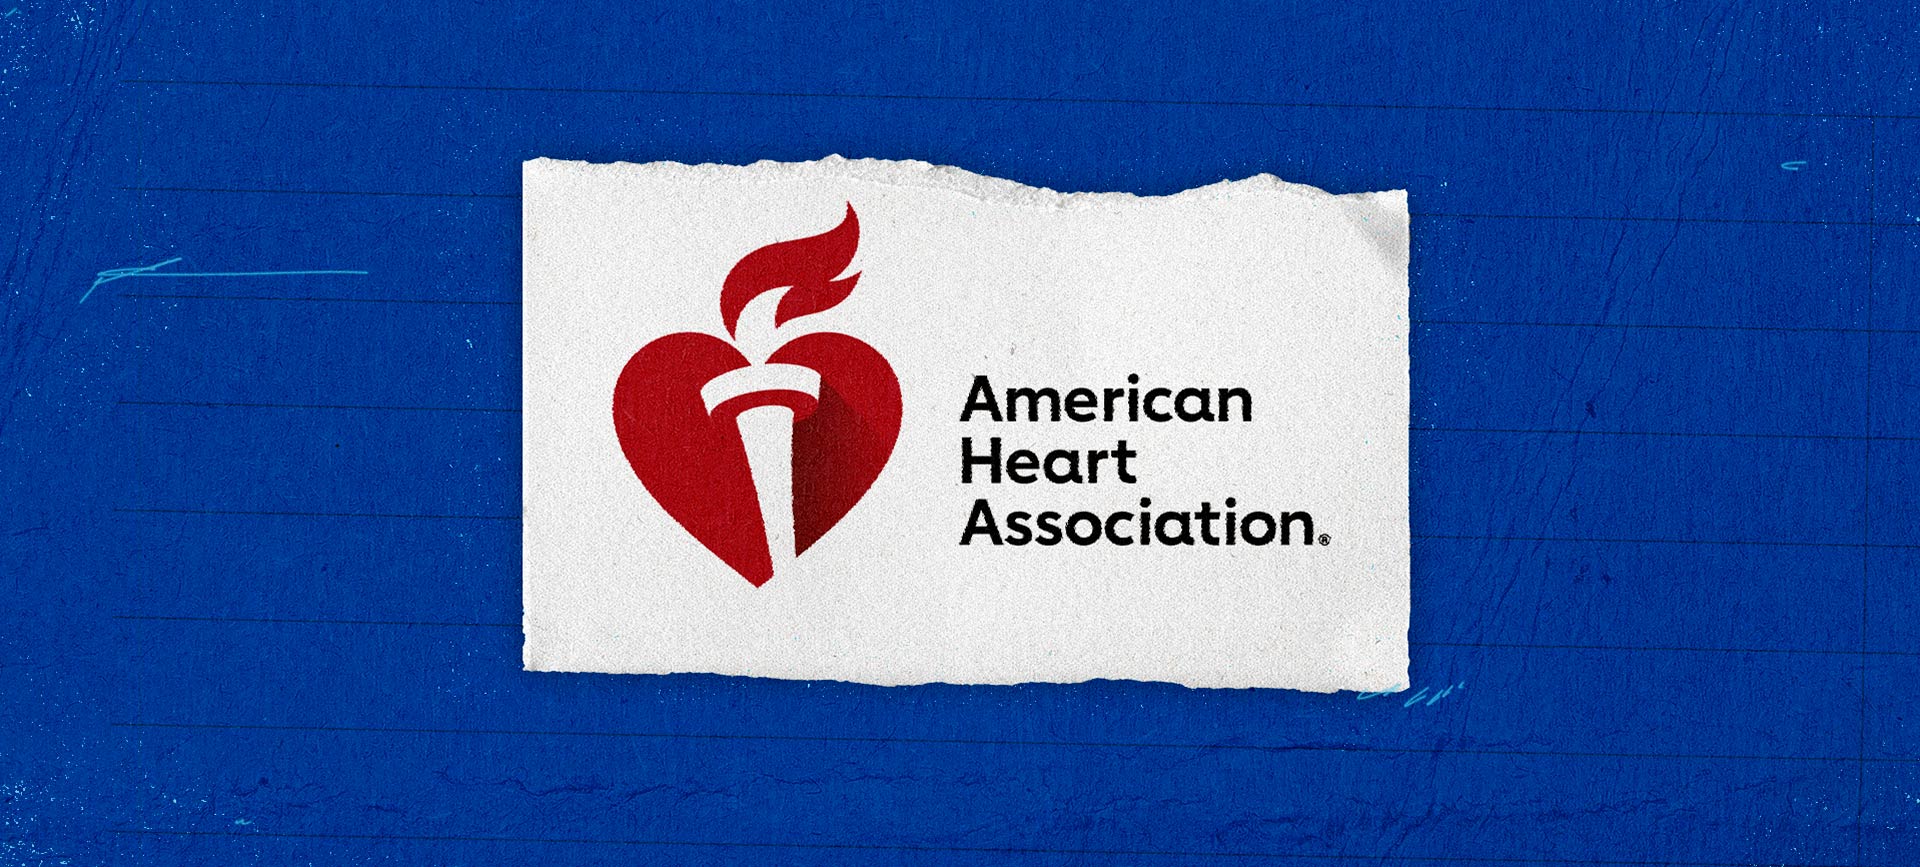 The American Heart Association logo is on a blue background.